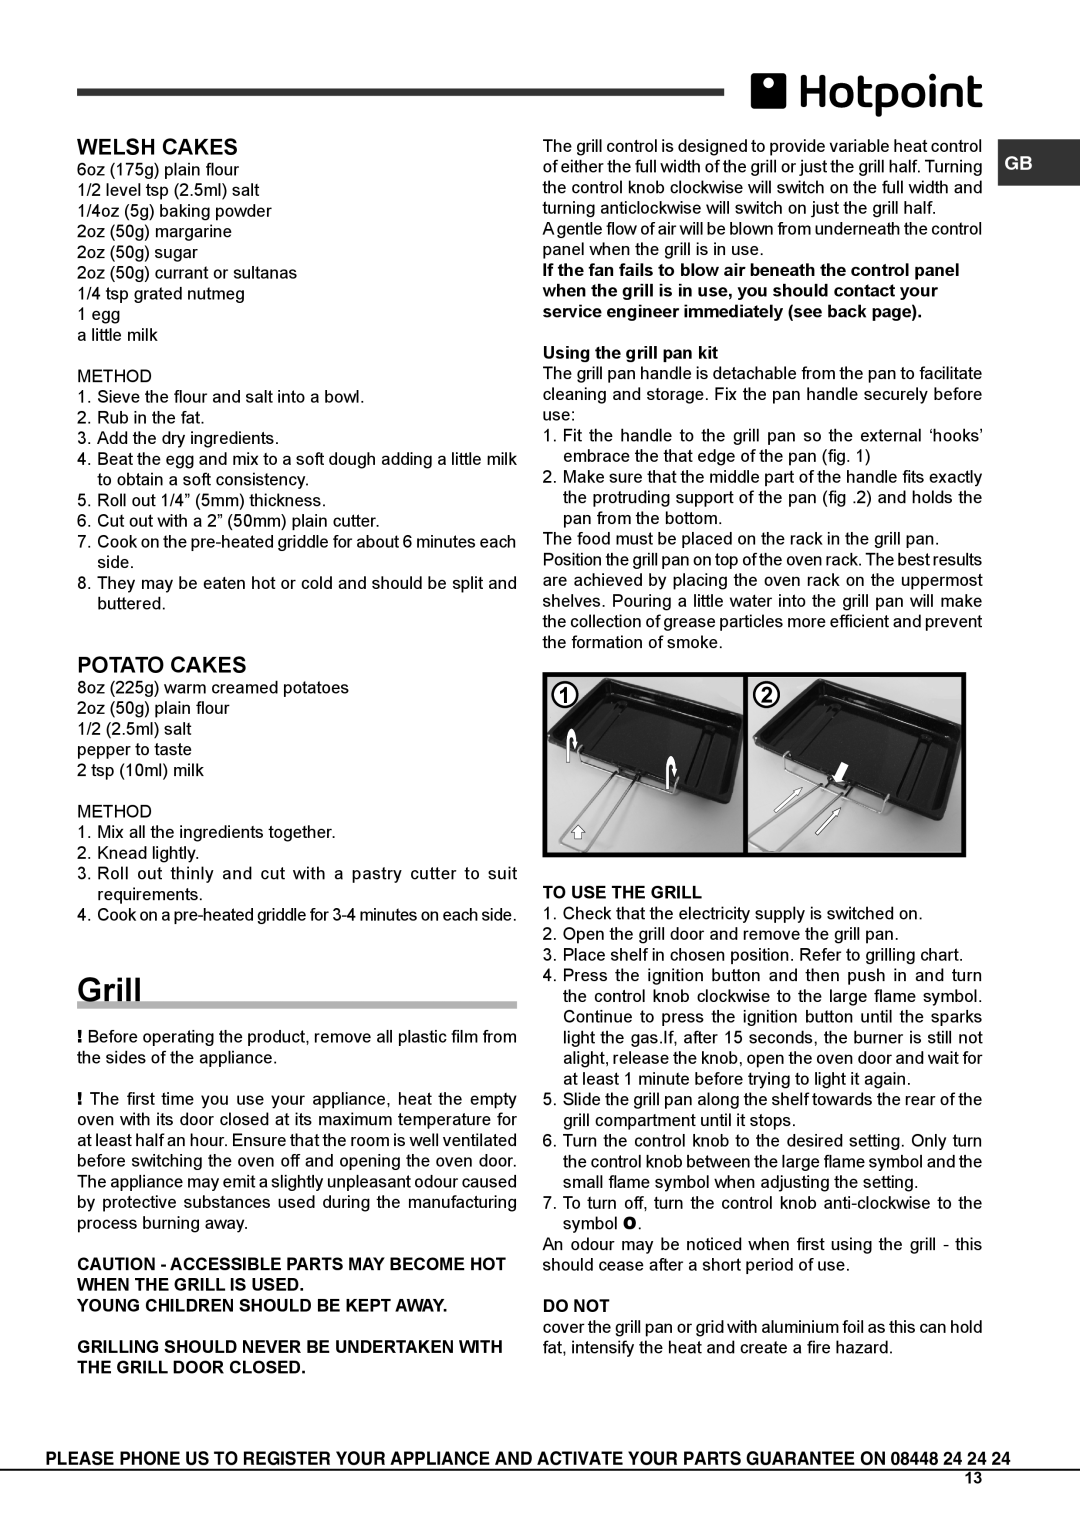 Hotpoint CH 10755 GF S, CH 10756 GF S, CH 10750 GF S operating instructions Grill, Welsh Cakes, Potato Cakes 